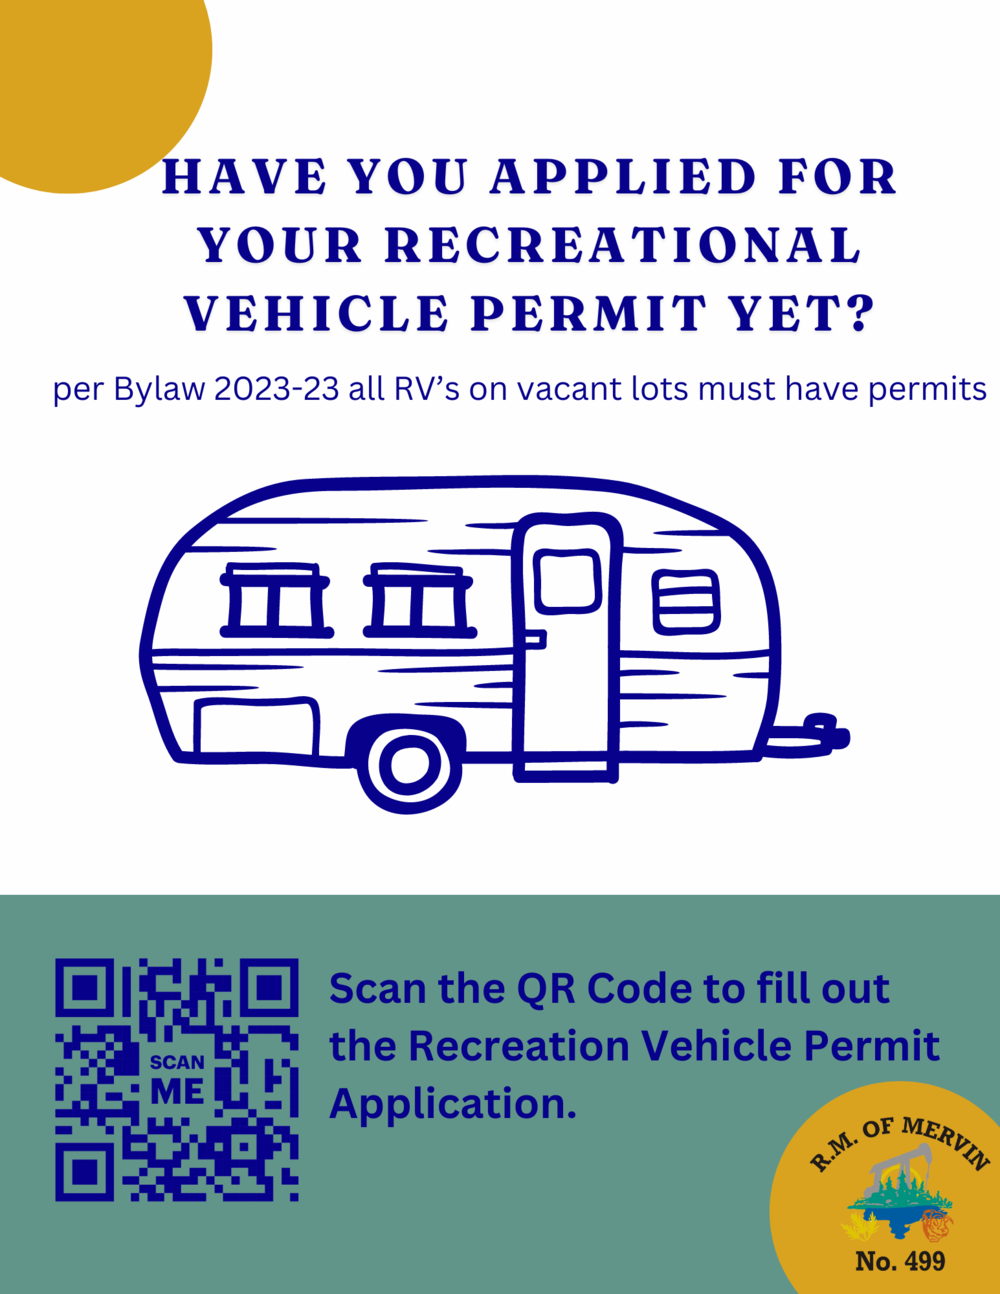 Have you got your Recreational Vehicle Permit yet?